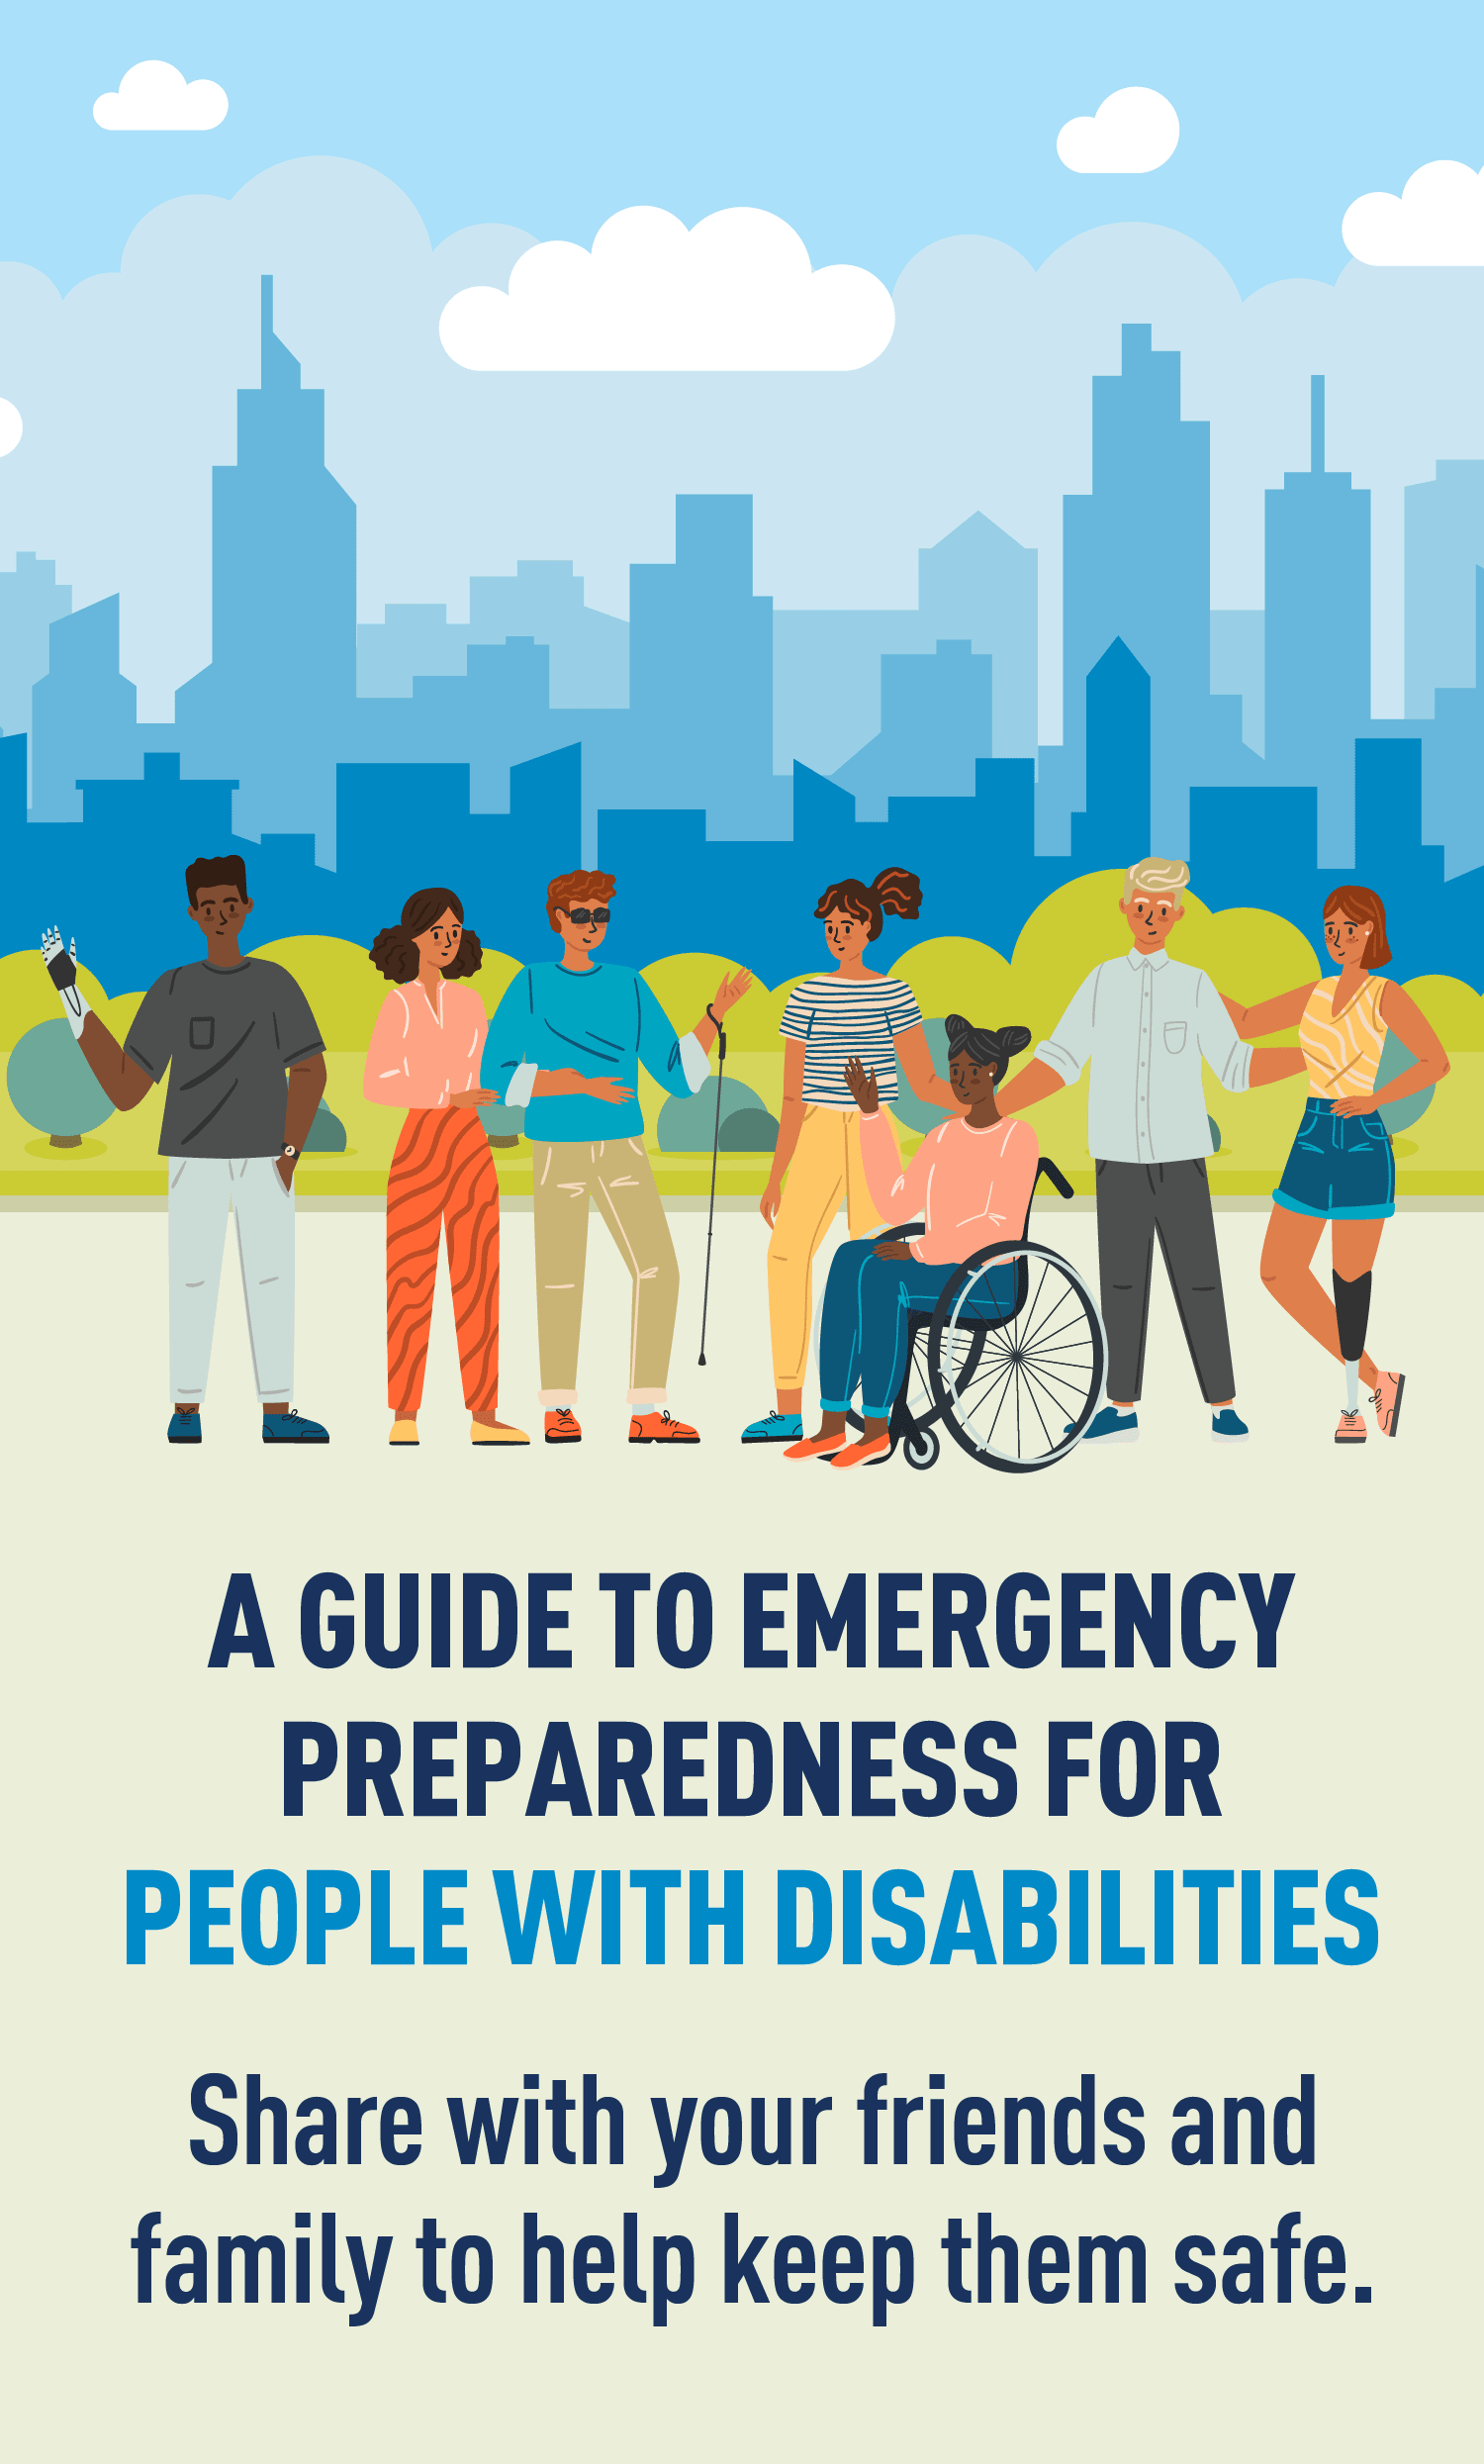 Image: Group of people. Text: A GUIDE TO EMERGENCY PREPAREDNESS FOR PEOPLE WITH DISABILITIES Share with your friends and family to help keep them safe.